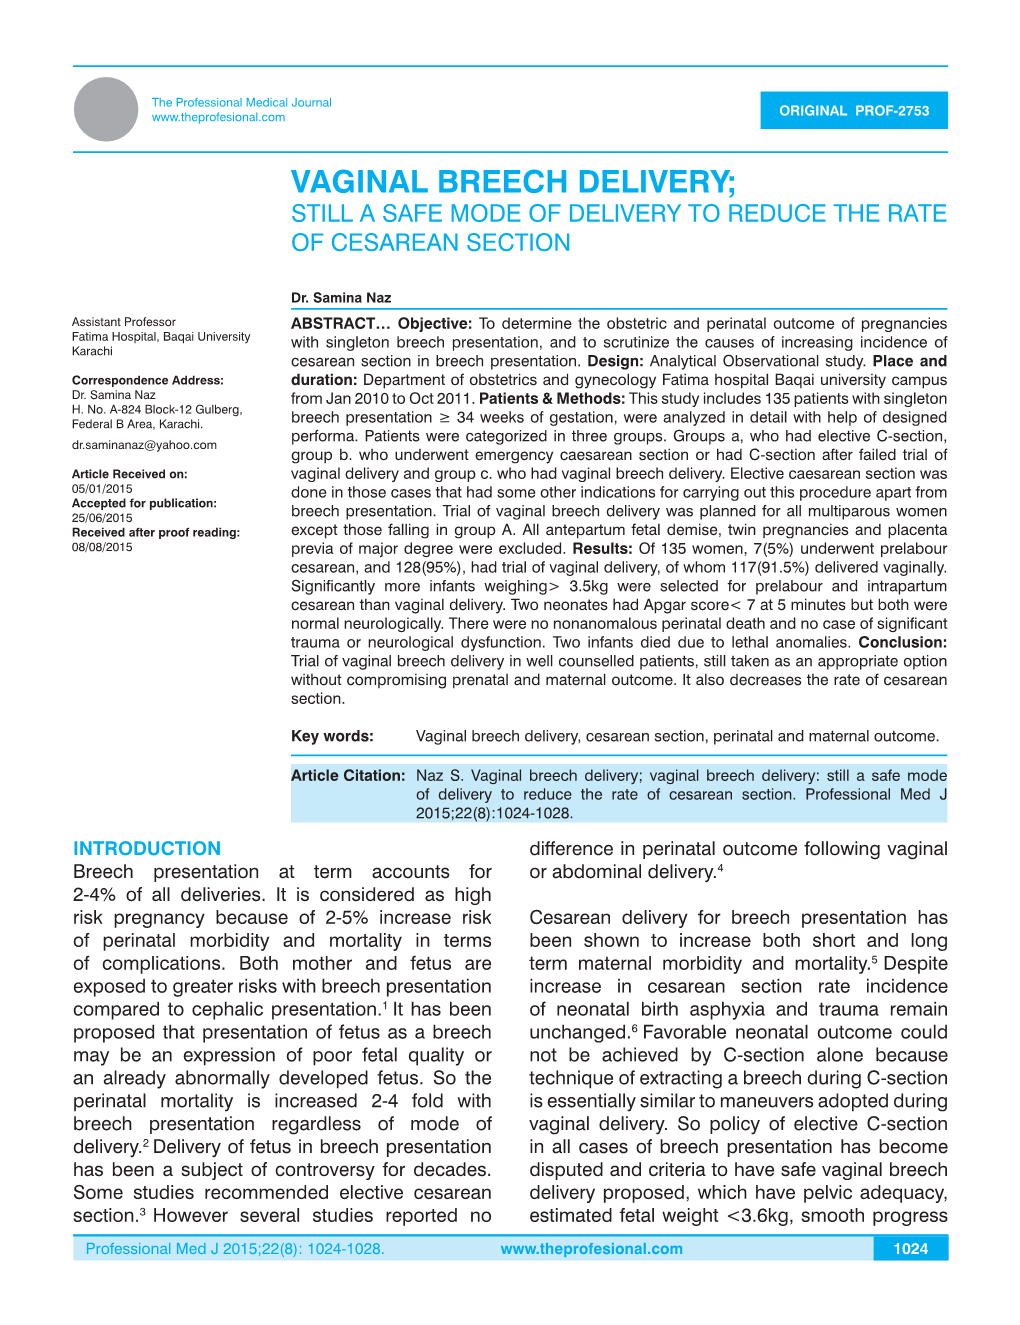 Vaginal Breech Delivery; Still a Safe Mode of Delivery to Reduce the Rate of Cesarean Section